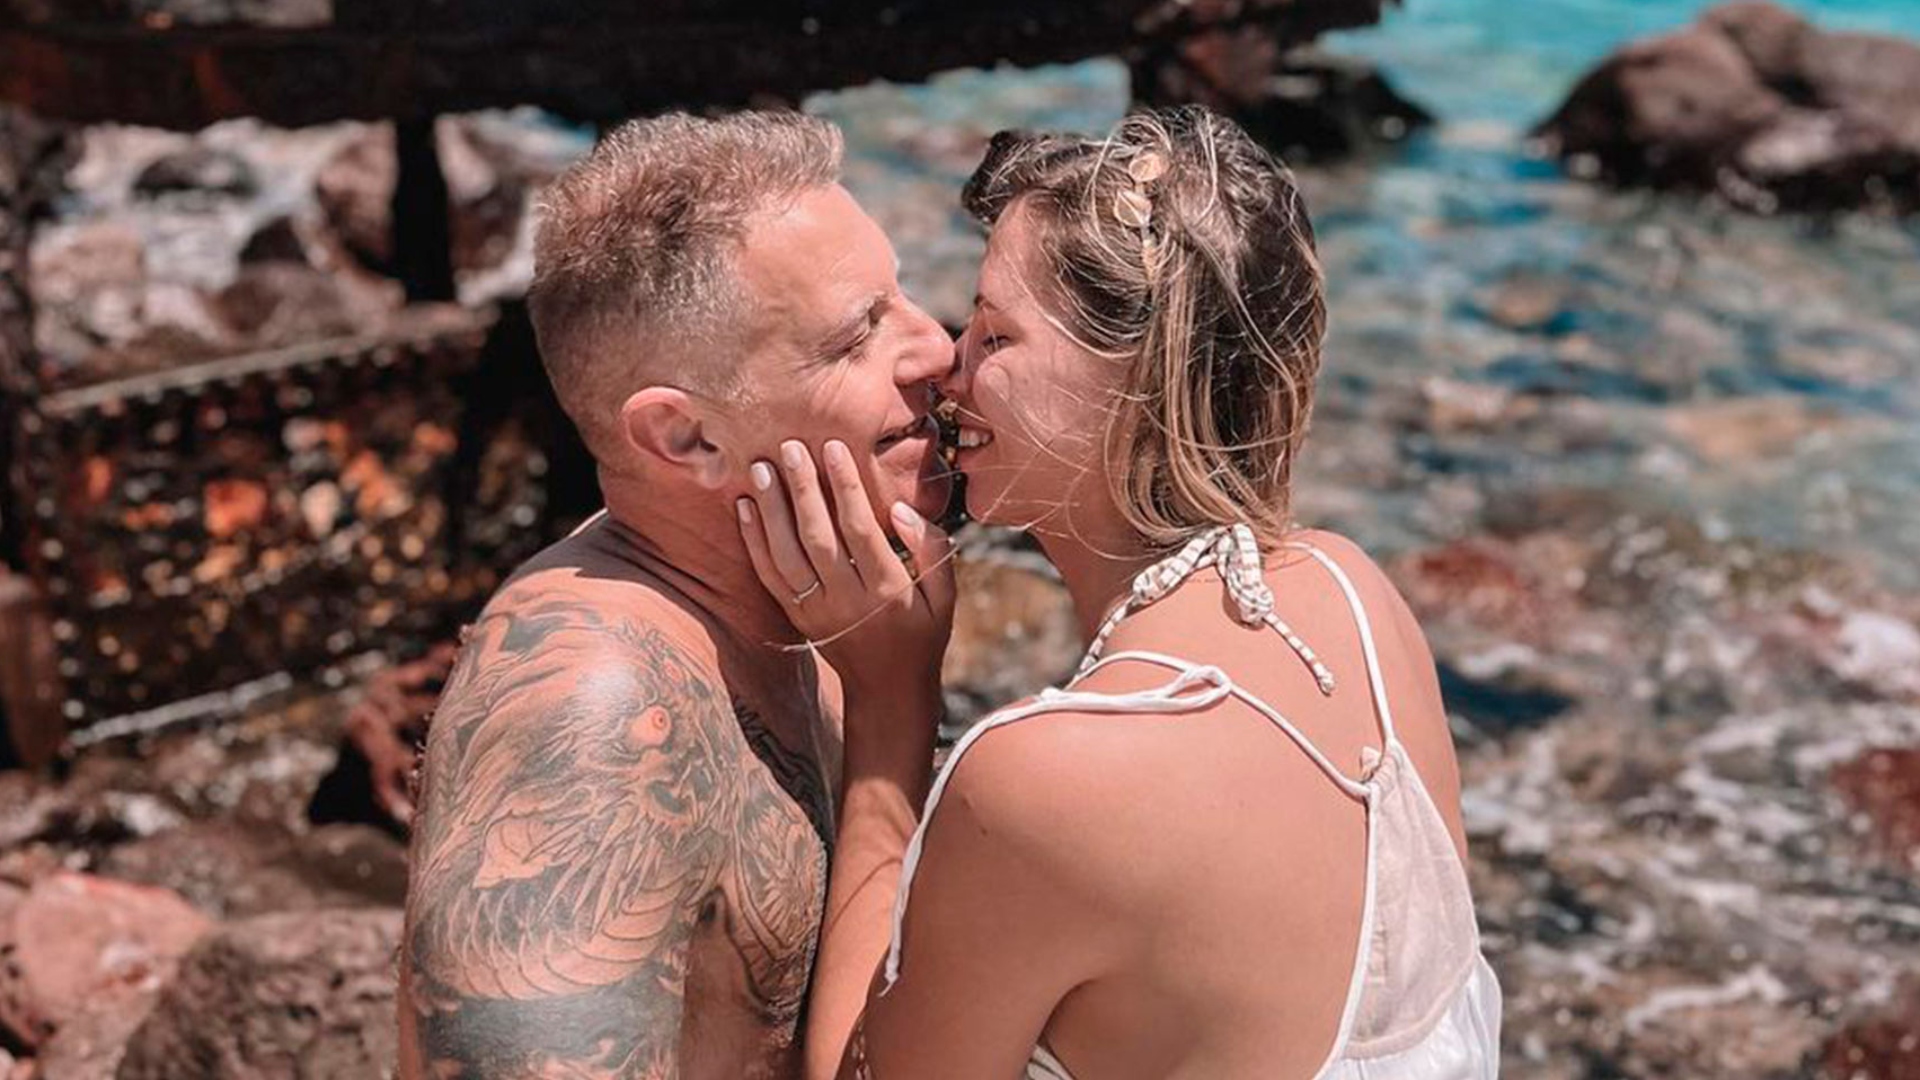 Alejandro Fantino And Connie Mosqueira Got Engaged On The Beaches Of Greece (Photo: Instagram)